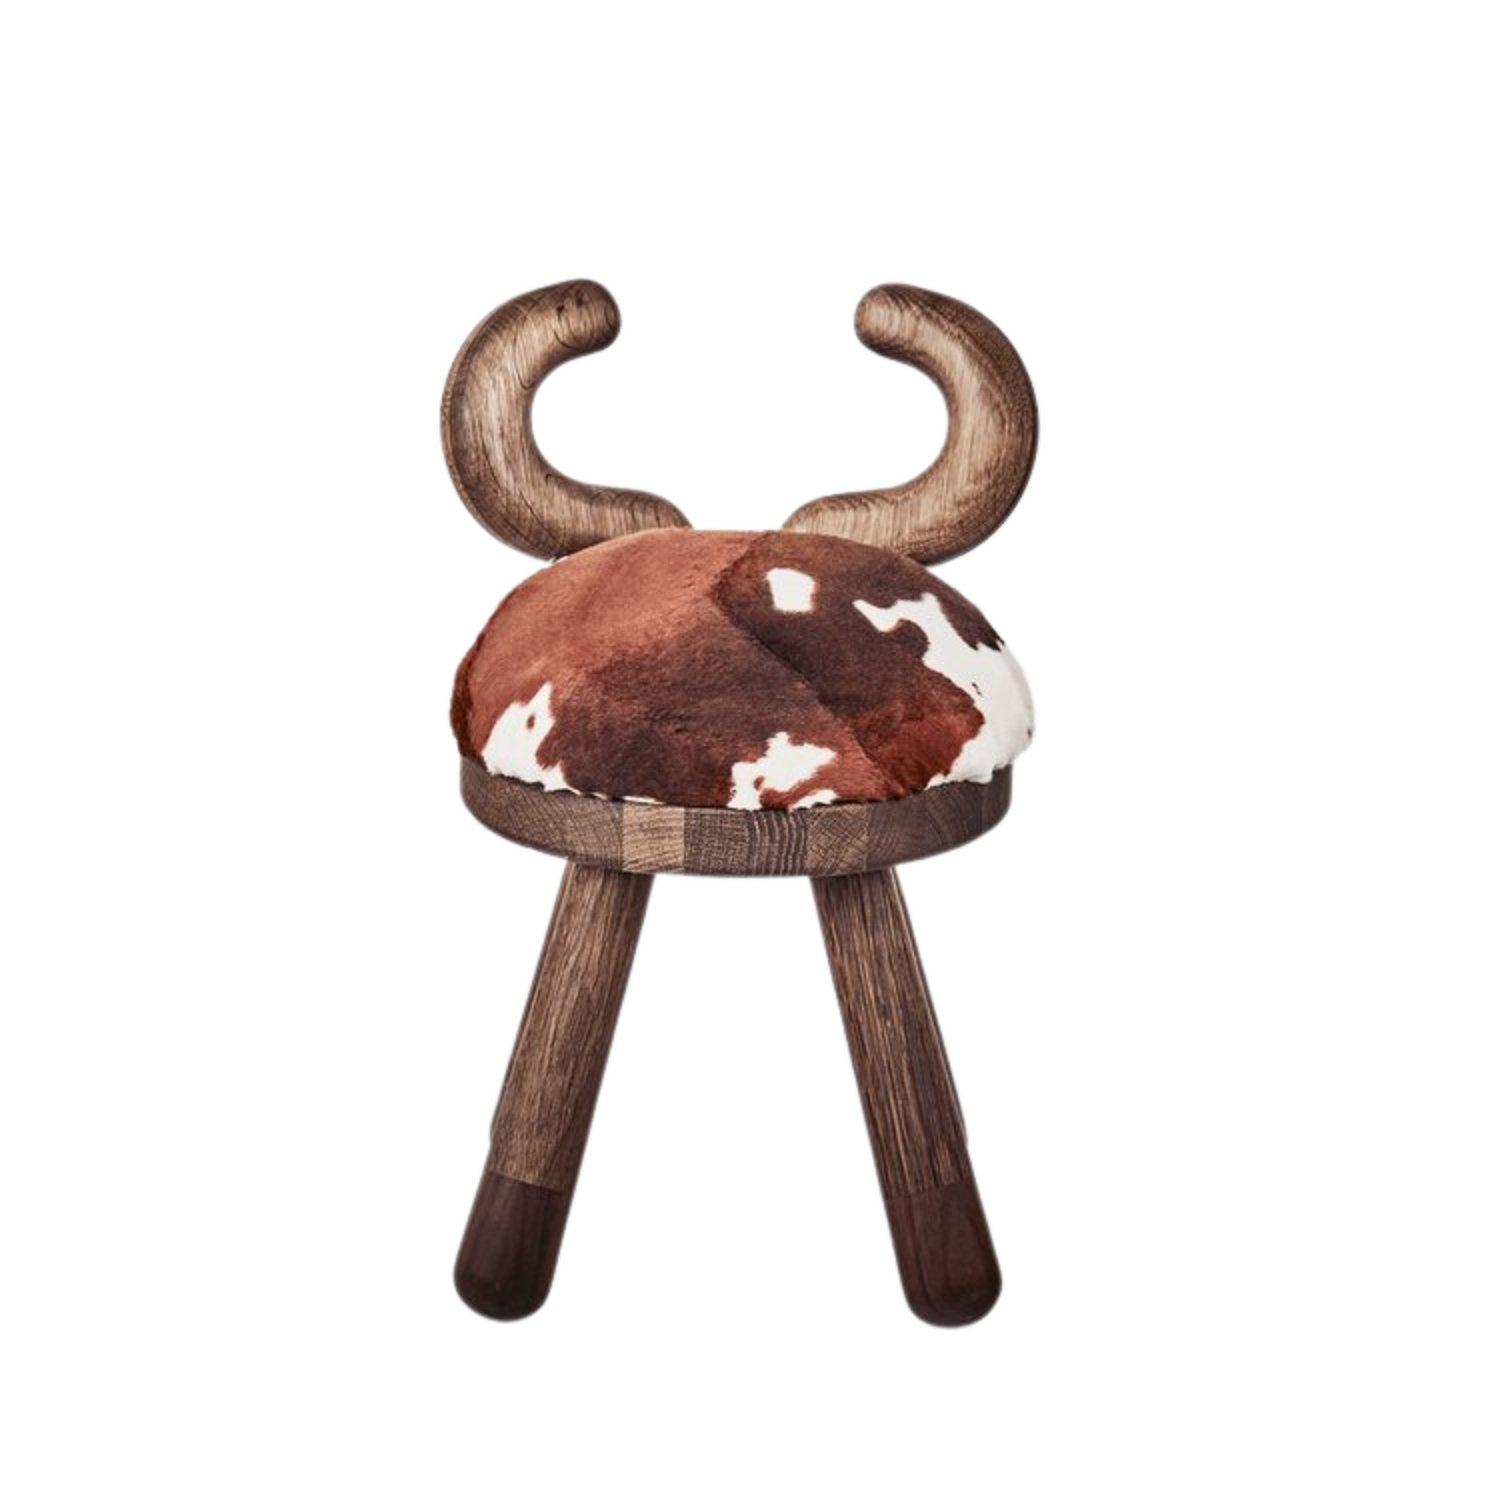 EO Cow chair